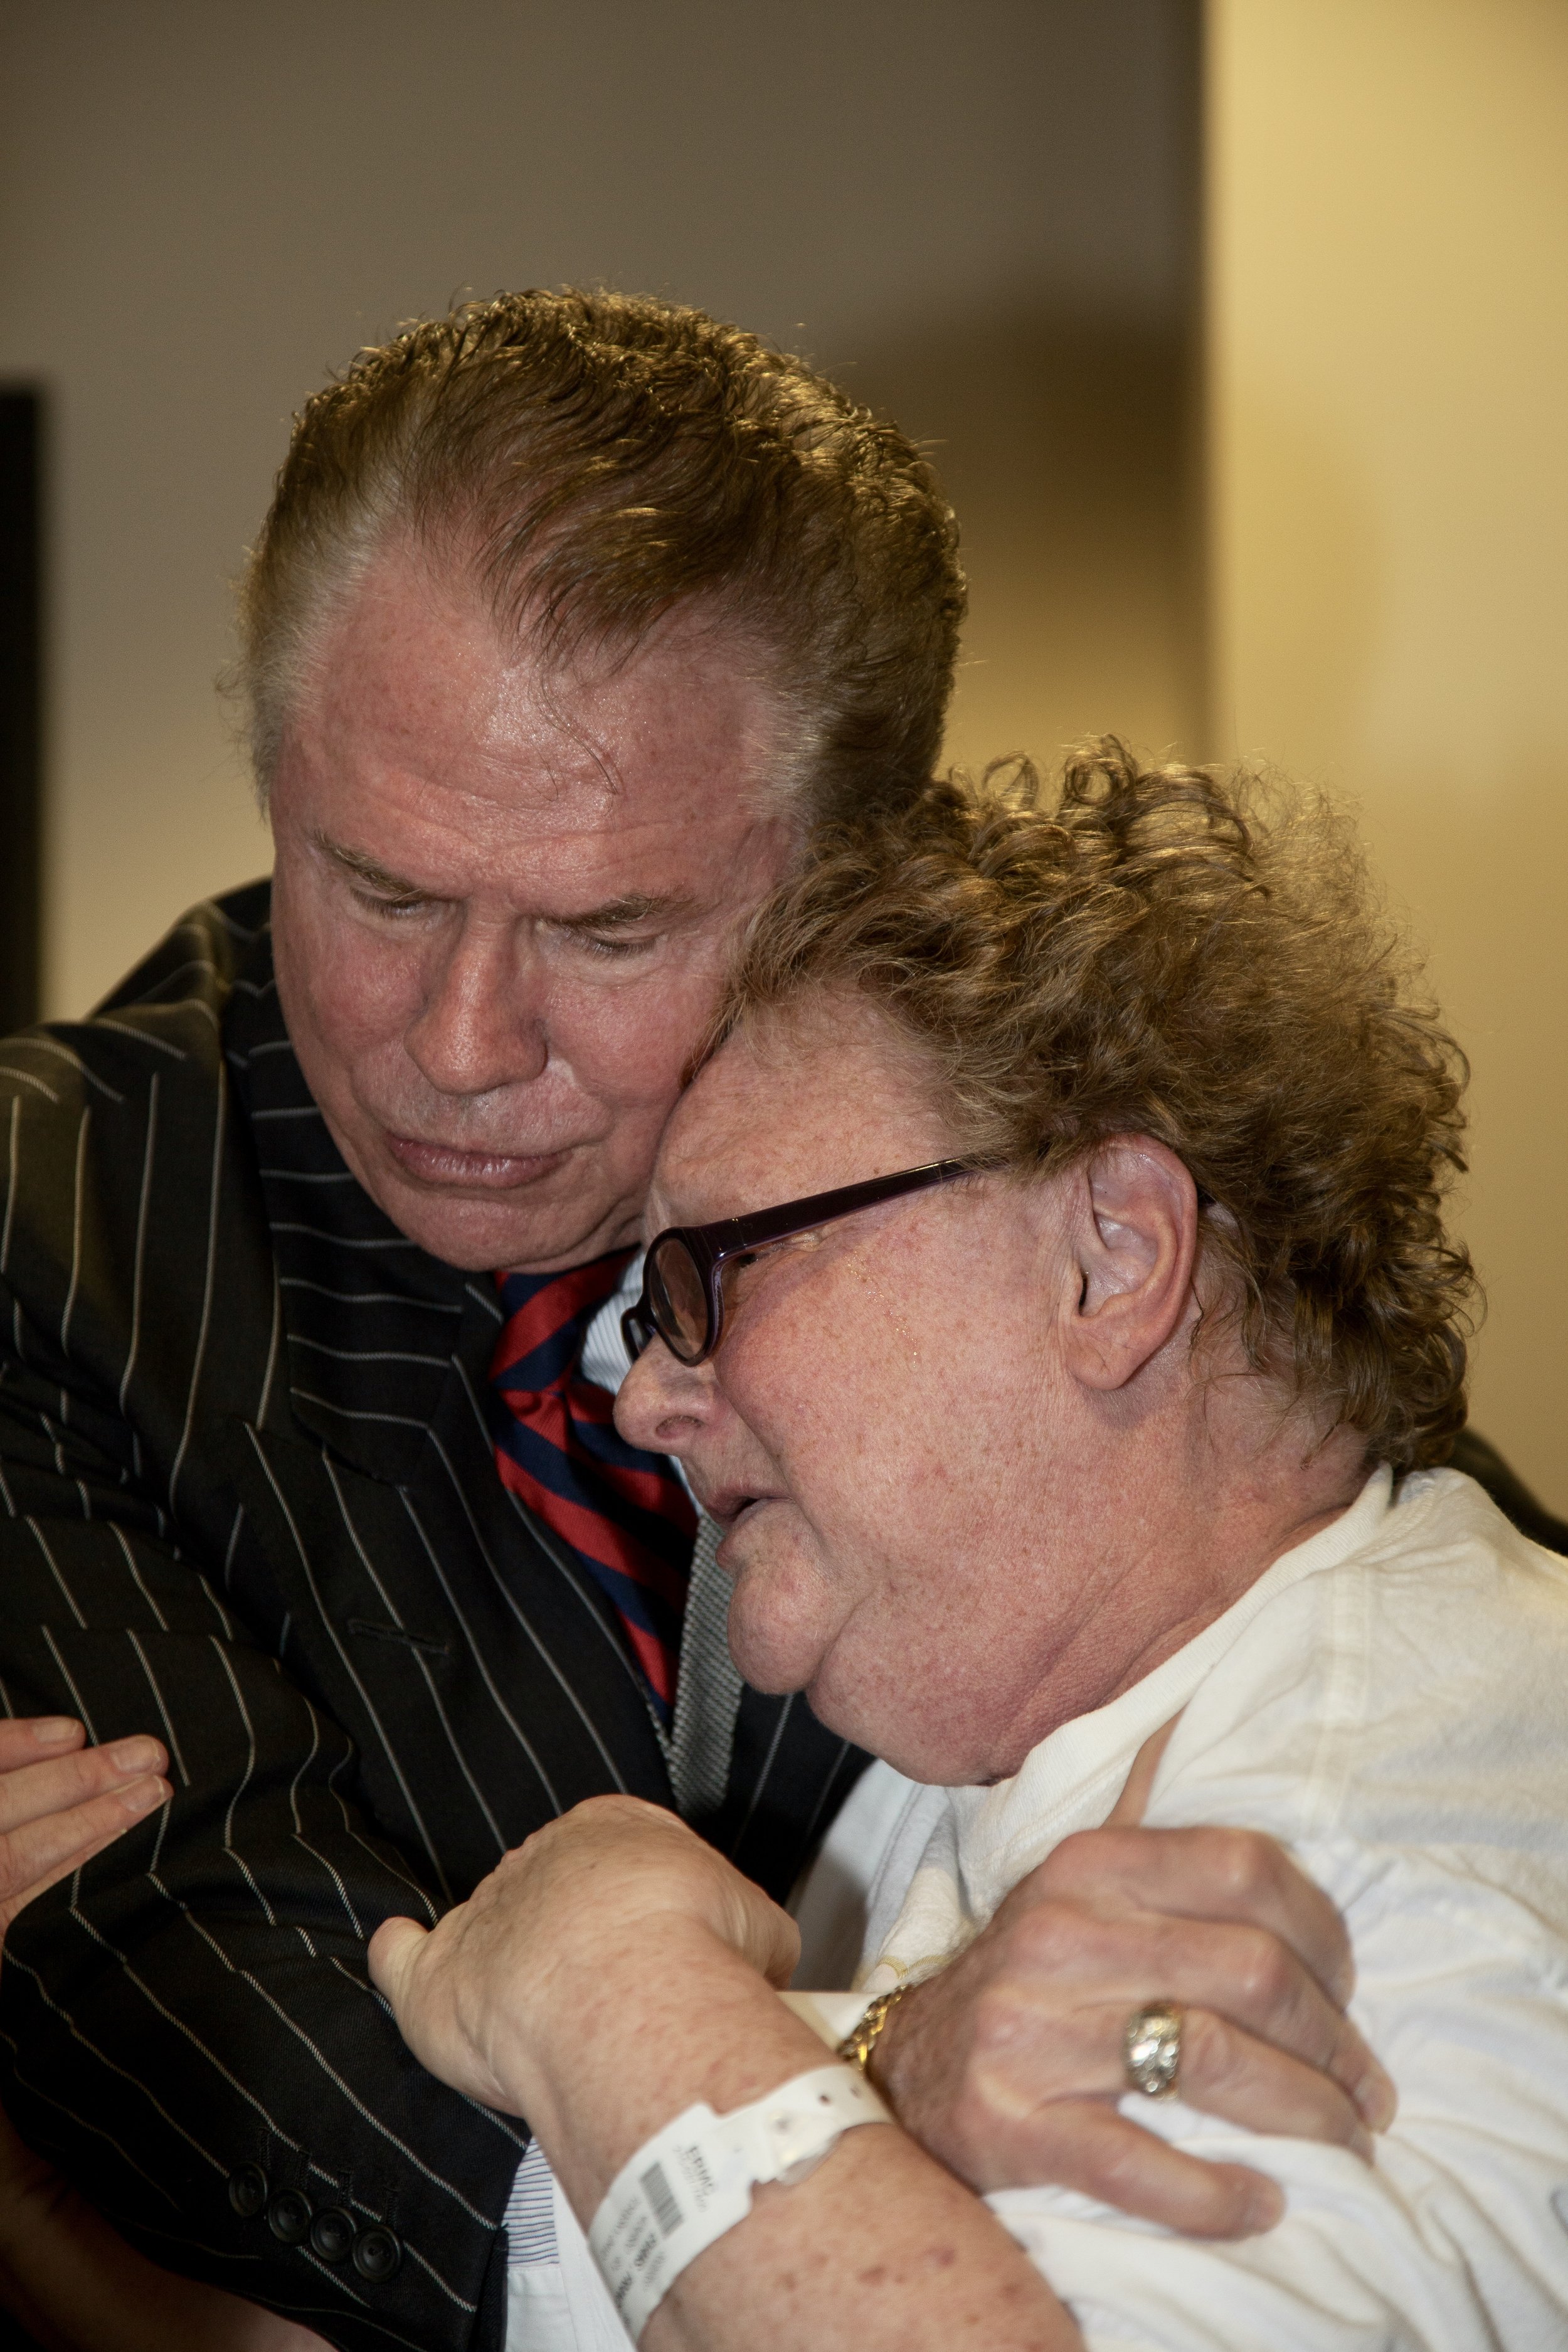 alt text: an older white man with a receding hairline and wearing a pinstripe suit consoles an older white woman wearing black thick-rimmed glasses as well as a hospital band on her wrist